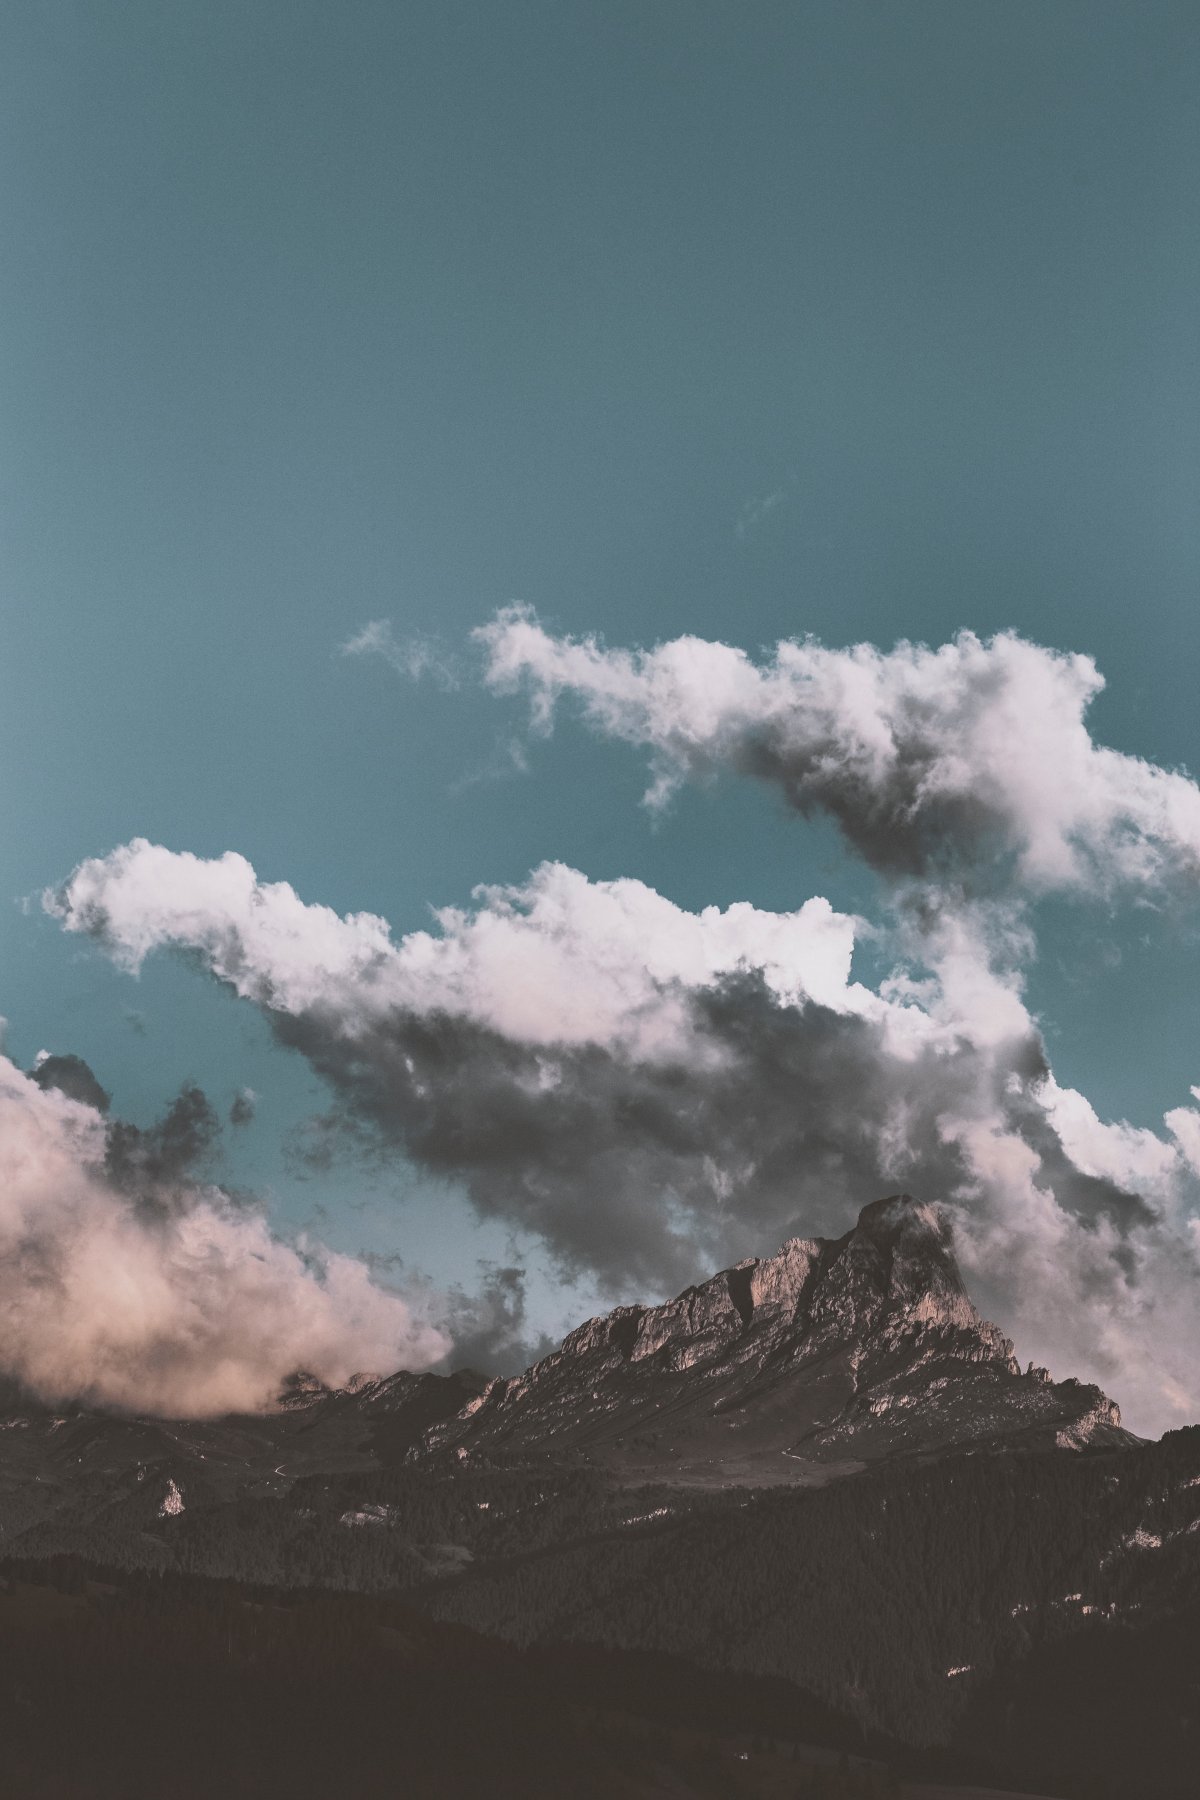 Clouds surrounding mountains pictures